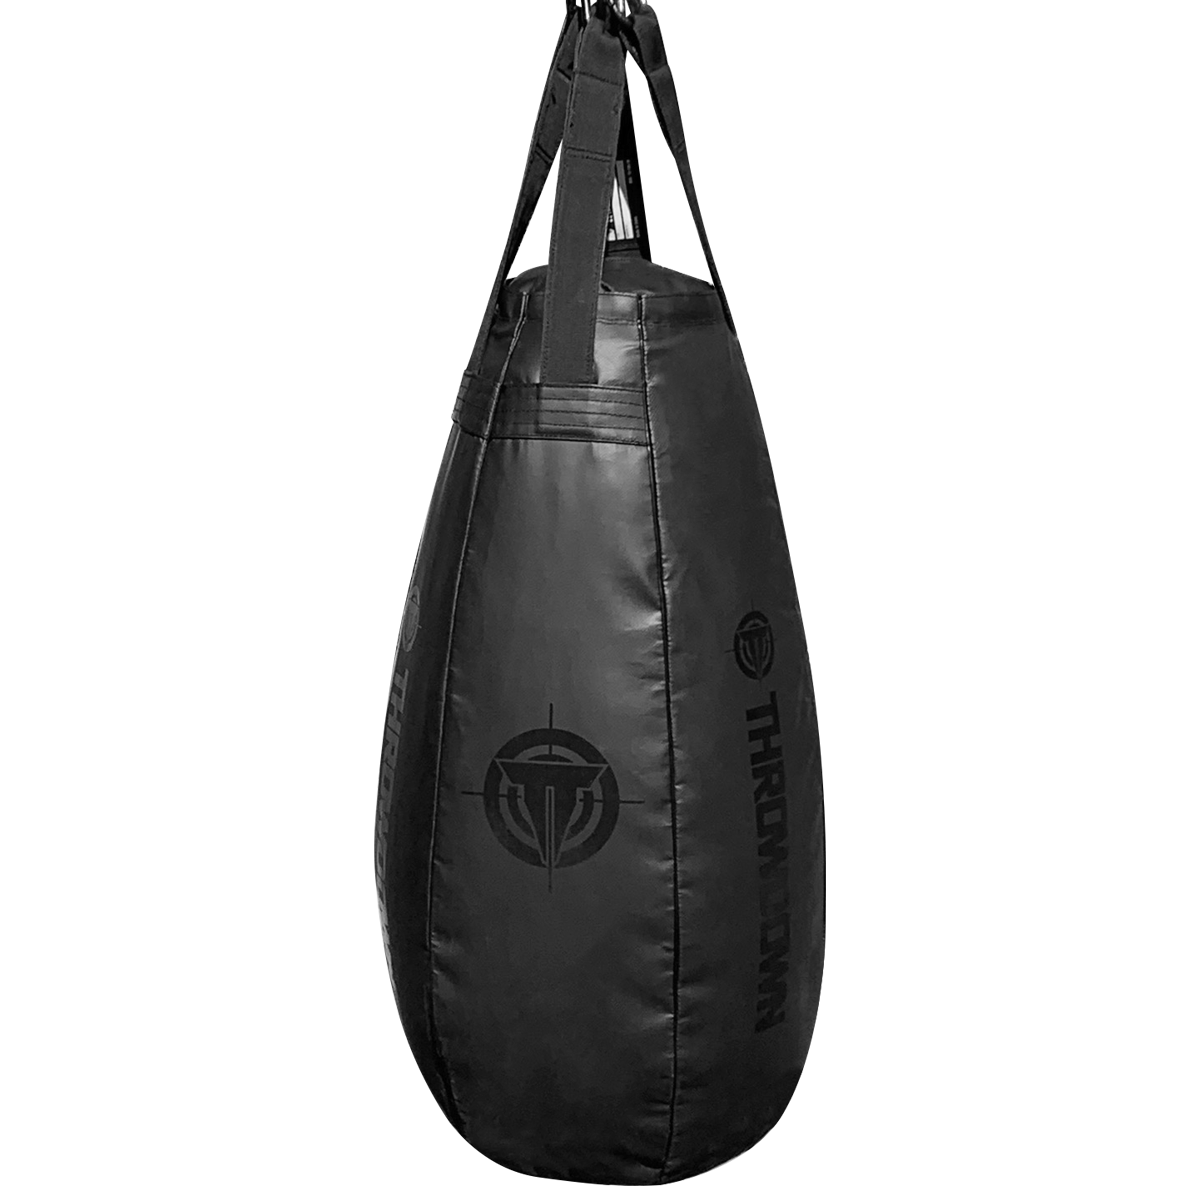 Facility Series Teardrop Heavy Bag│BUY NOW│Best Punching Bag for home — Throwdown Industries